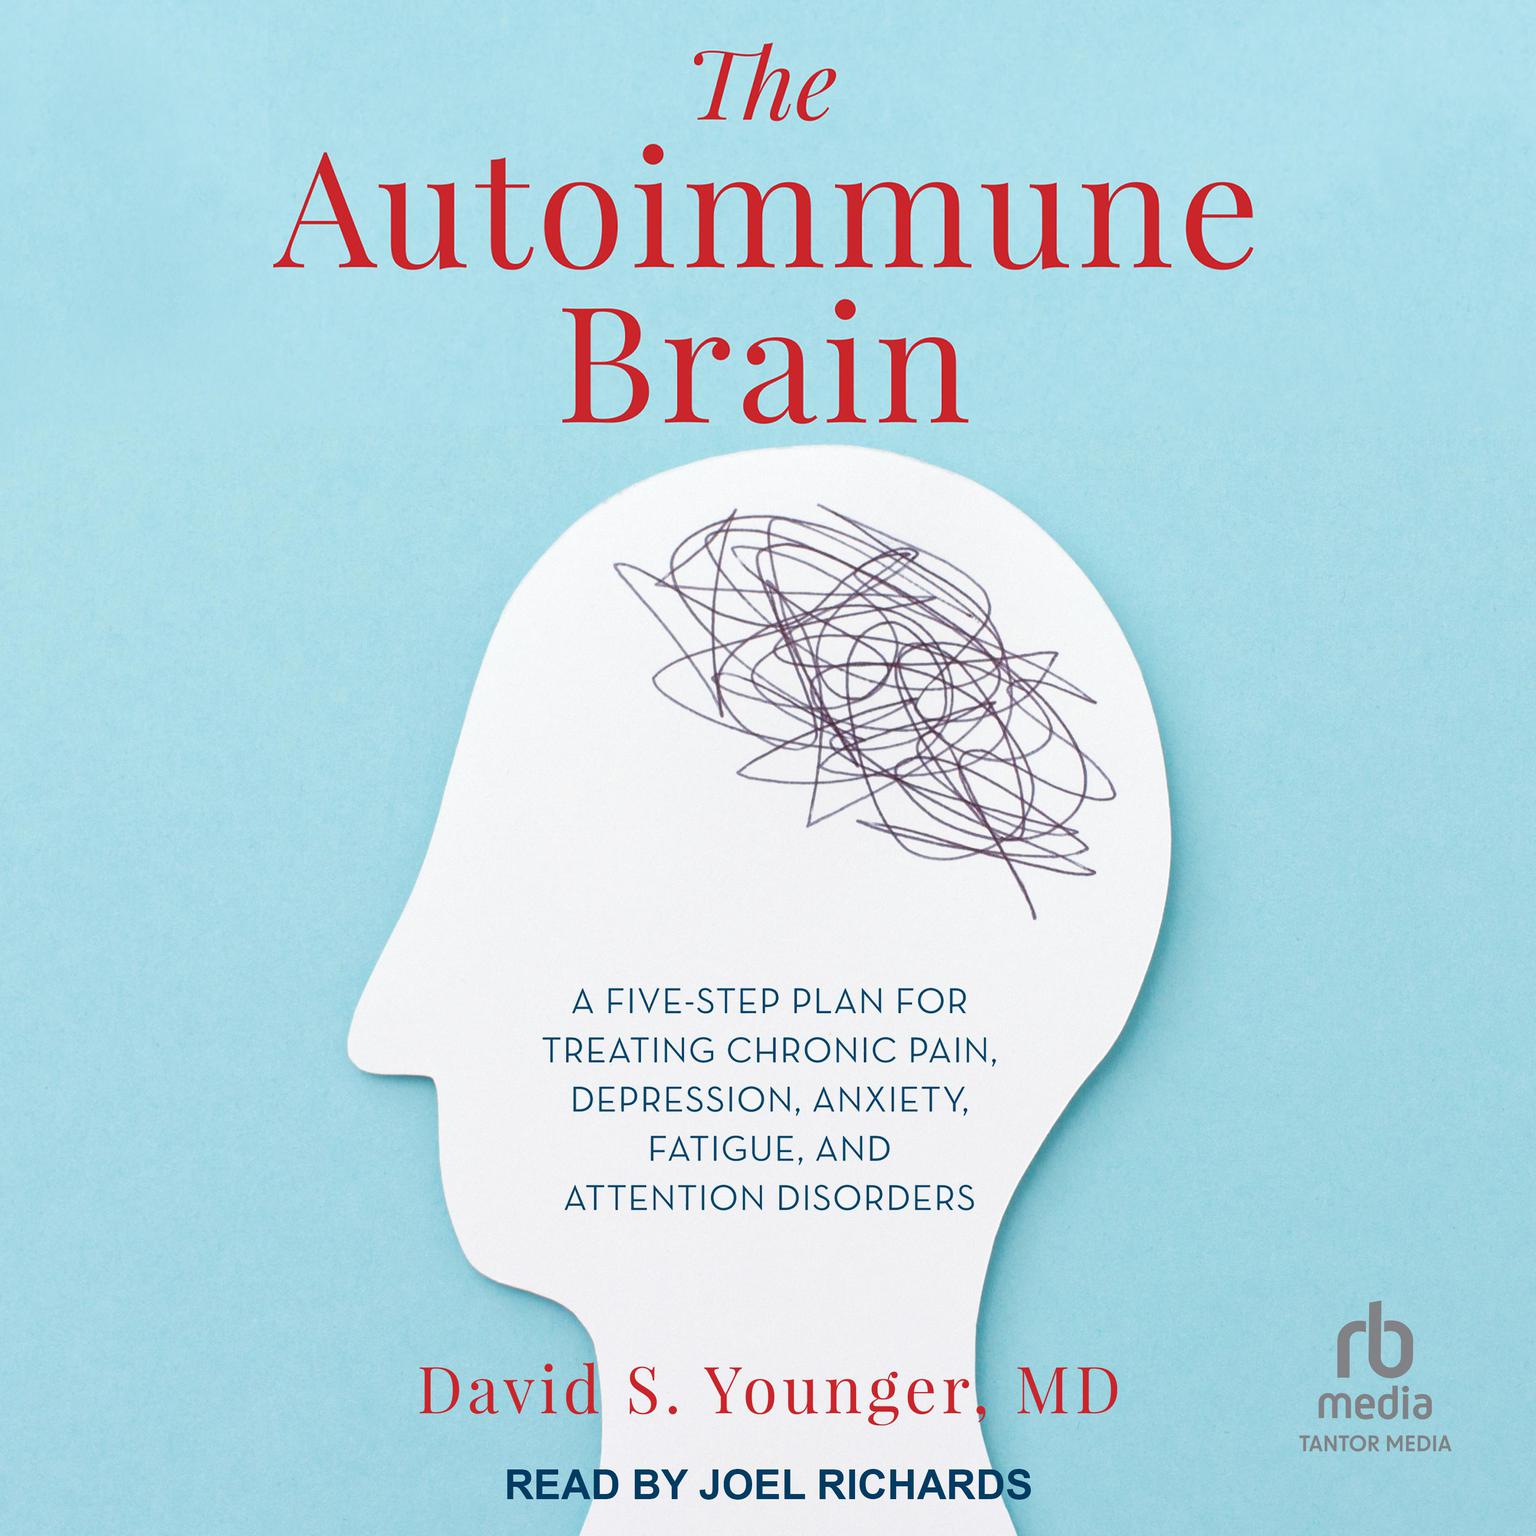 The Autoimmune Brain: A Five-Step Plan for Treating Chronic Pain, Depression, Anxiety, Fatigue, and Attention Disorders Audiobook, by David S. Younger